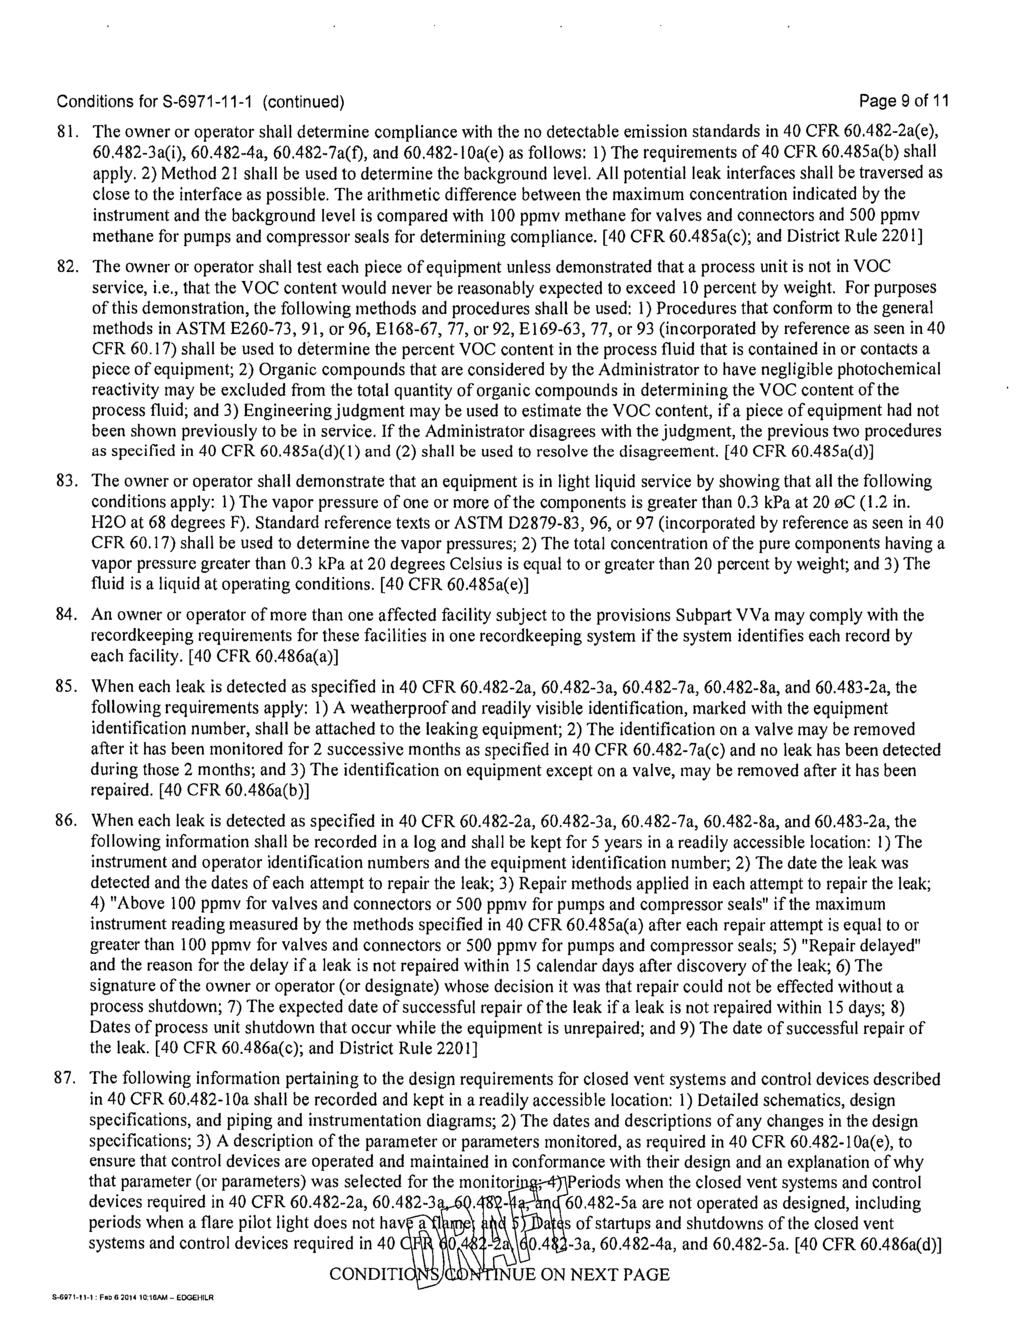 Conditions for S-6971-11-1 (continued) Page 9 of 11 81. The owner or operator shall determine compliance with the no detectable emission standards in 40 CFR 60.482-2a(e), 60.482-3a(i), 60.482-4a, 60.